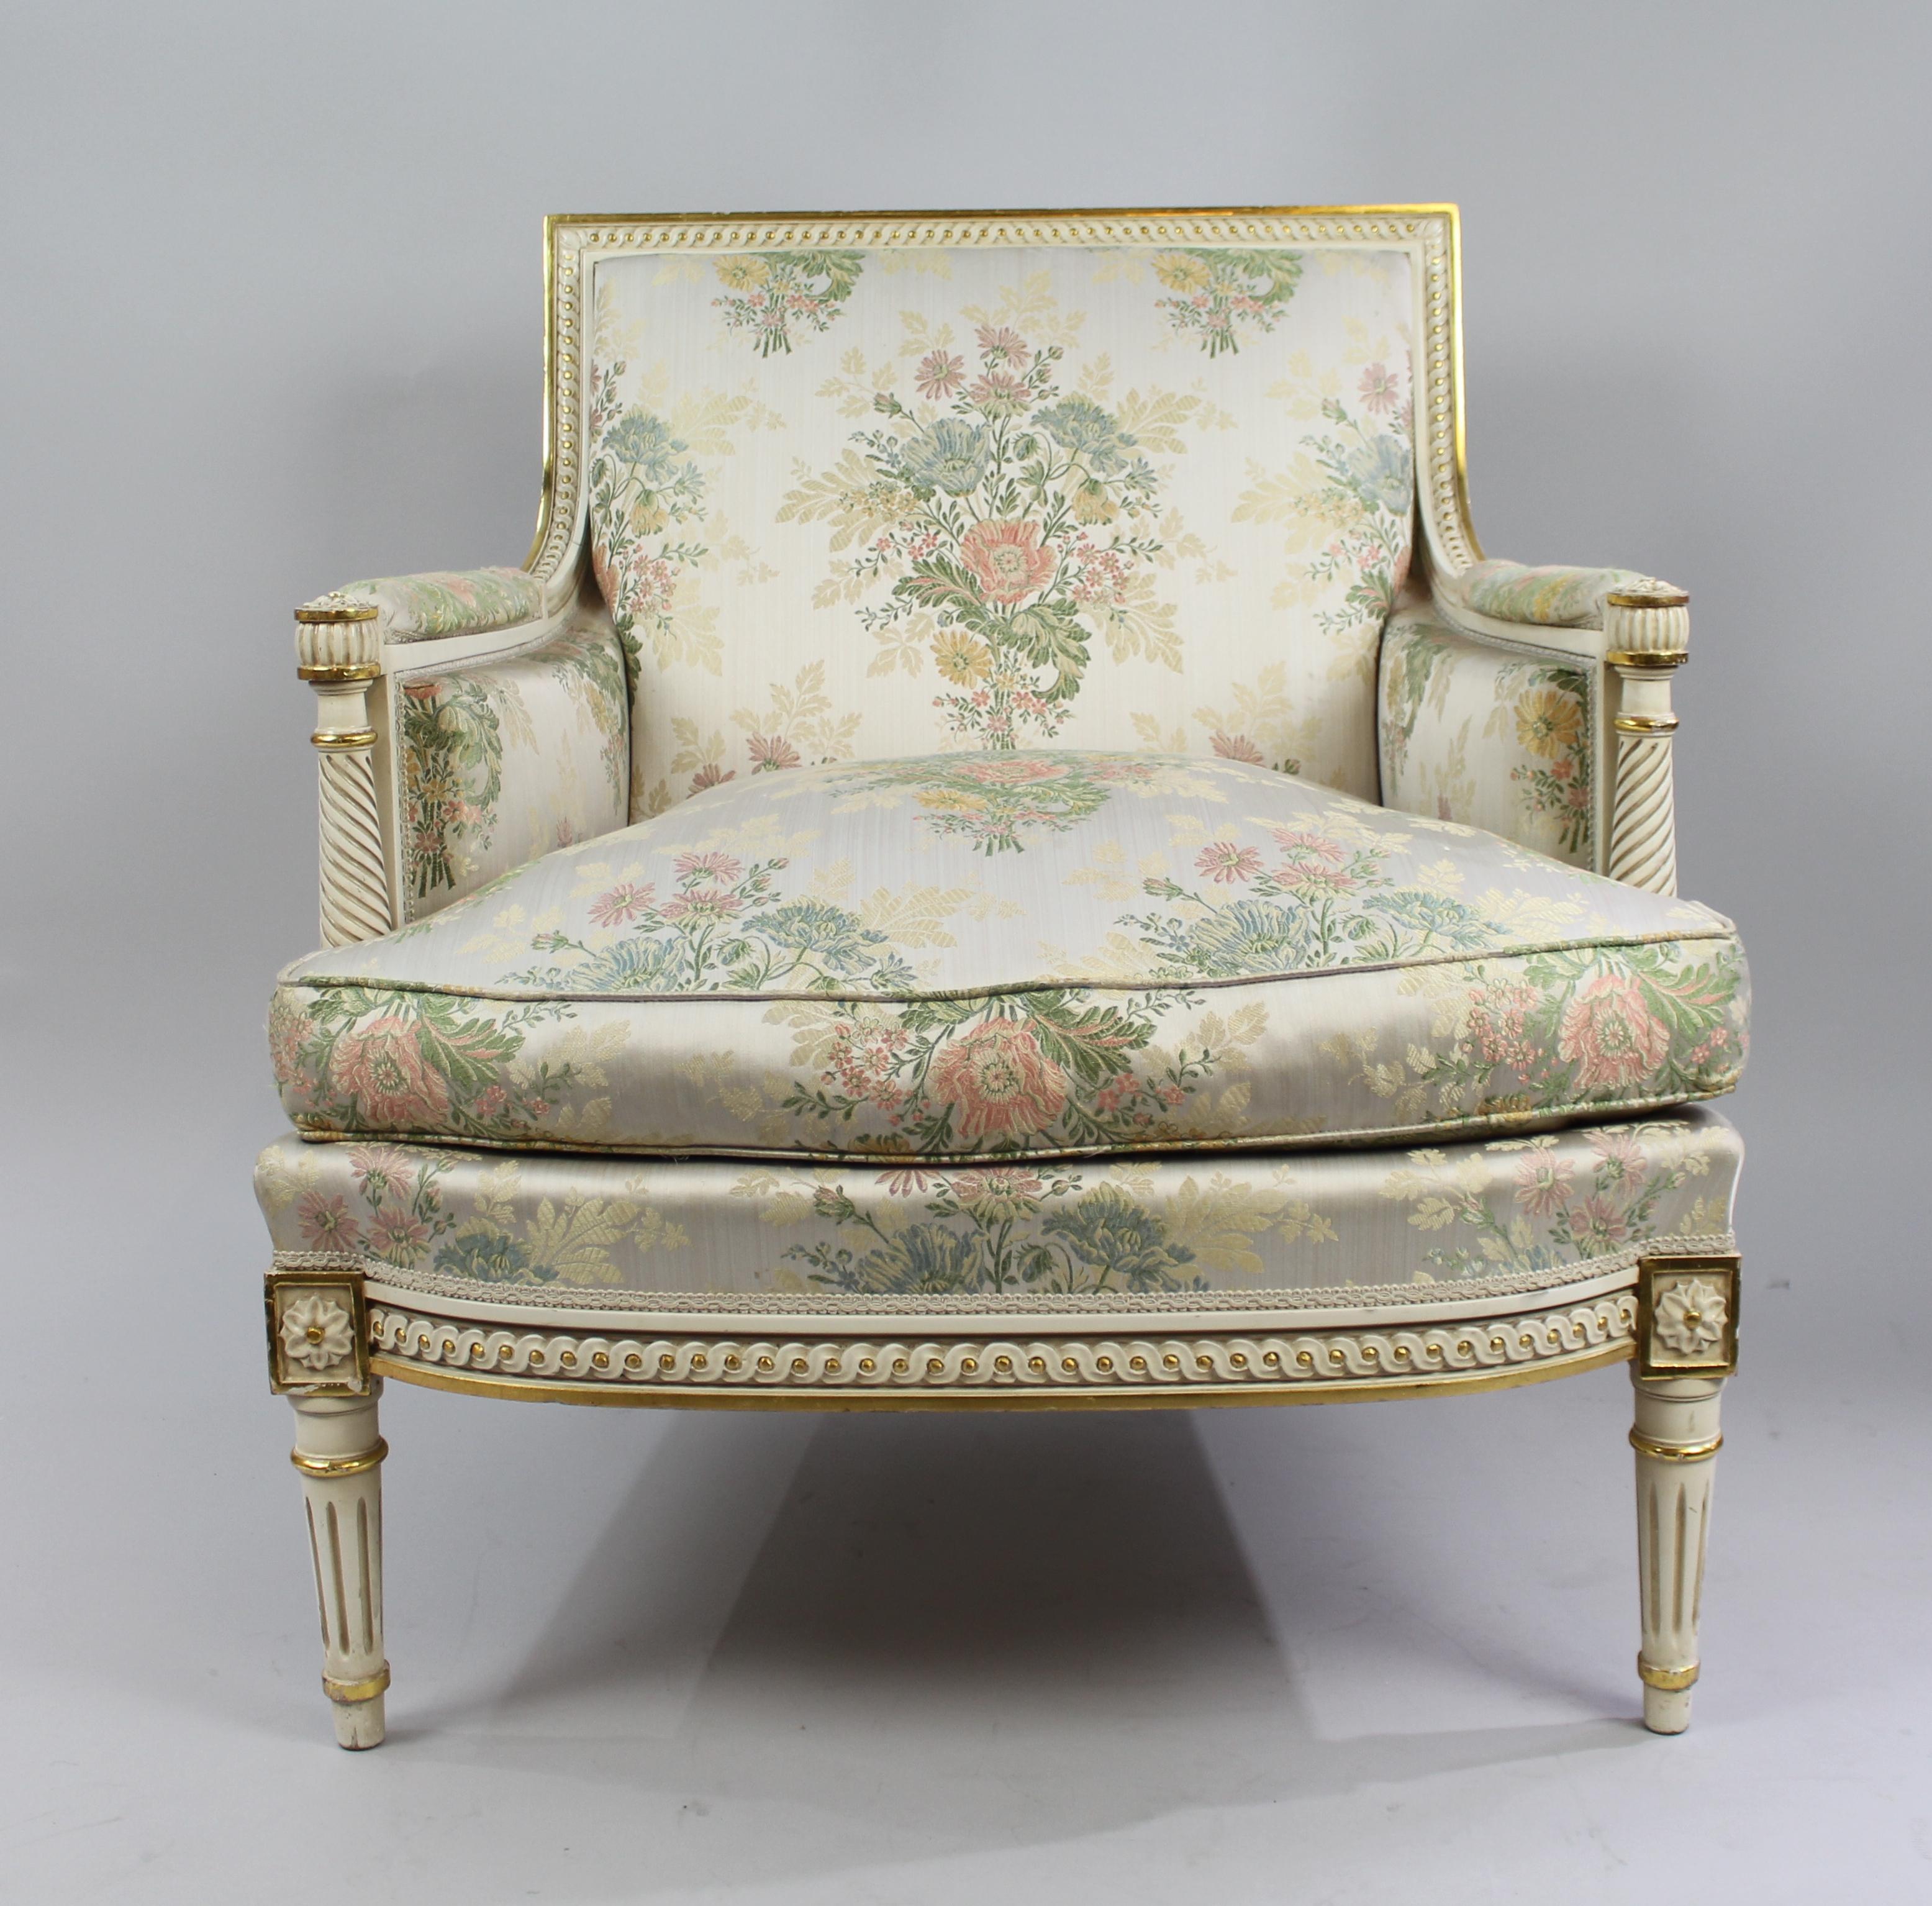 Italian Painted and Gilt Carved Wood Silik Upholstered Armchair In Good Condition For Sale In Worcester, Worcestershire